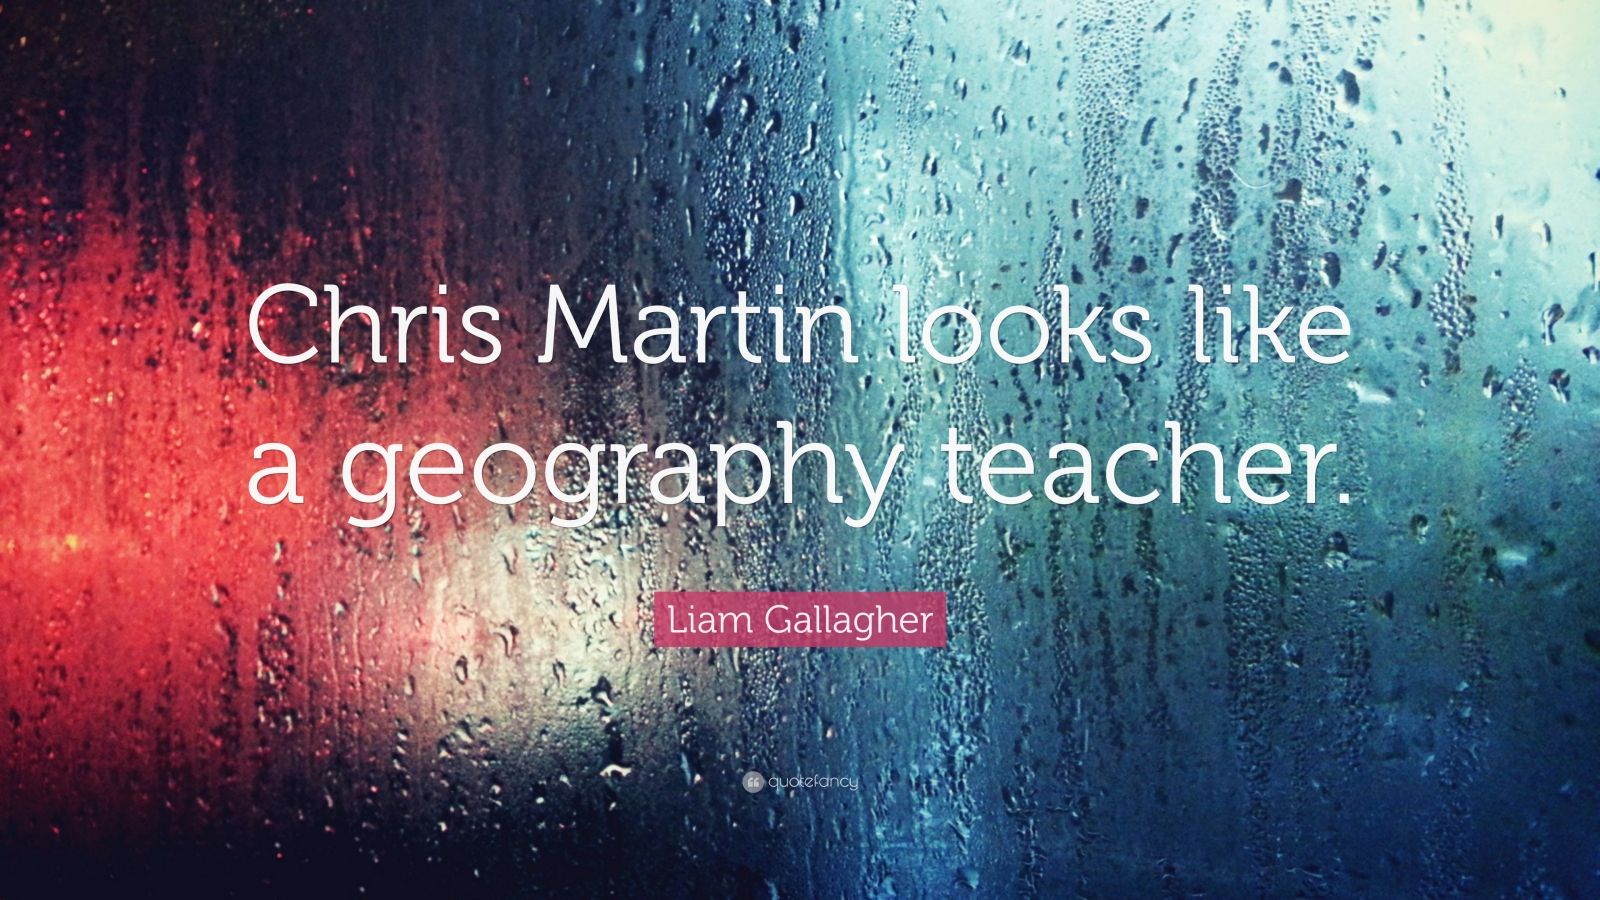 Liam Gallagher Quote: “Chris Martin looks like a geography teacher.” (7